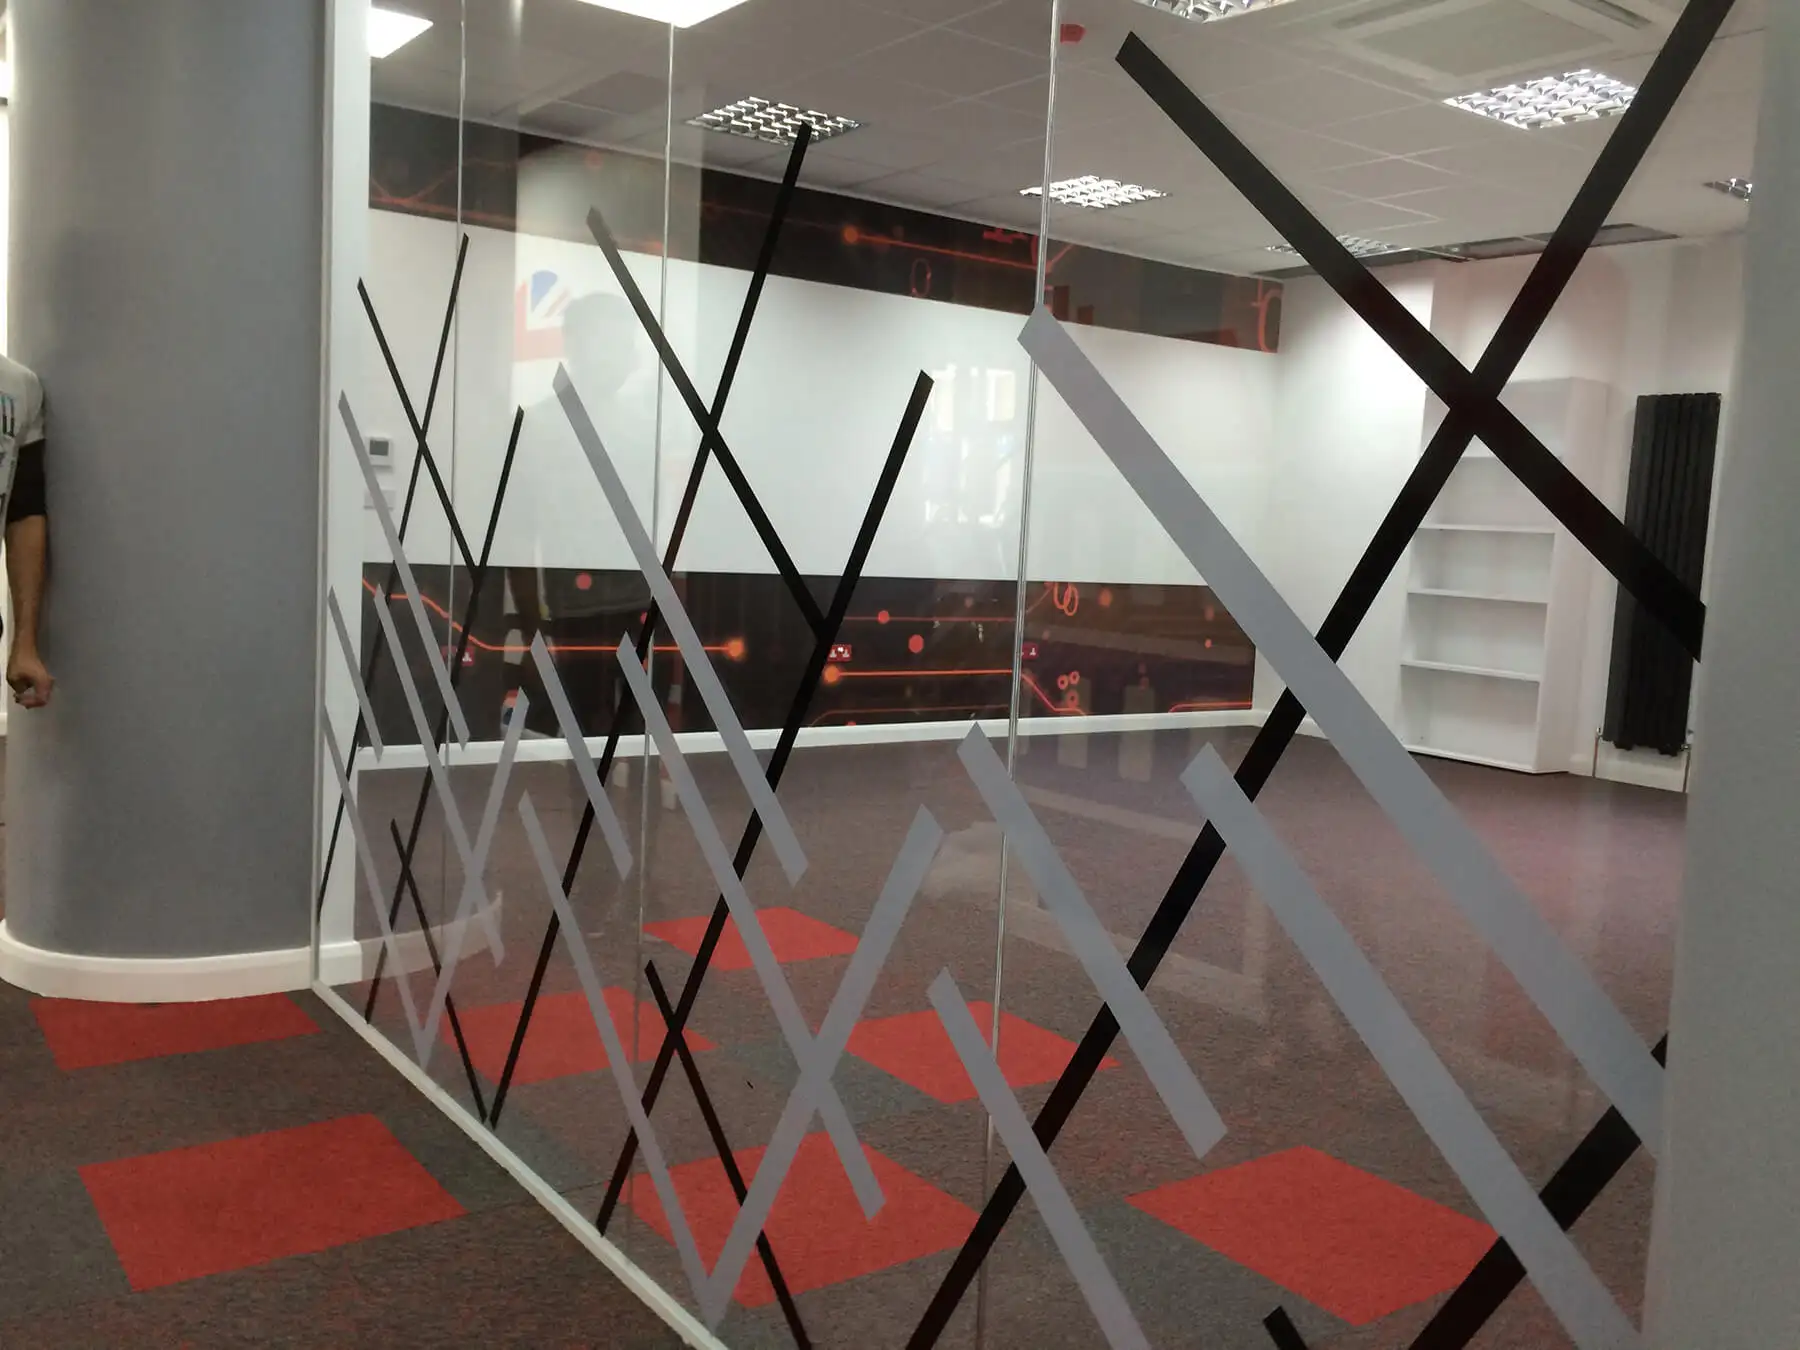 Office space with open storage and glass partitioning